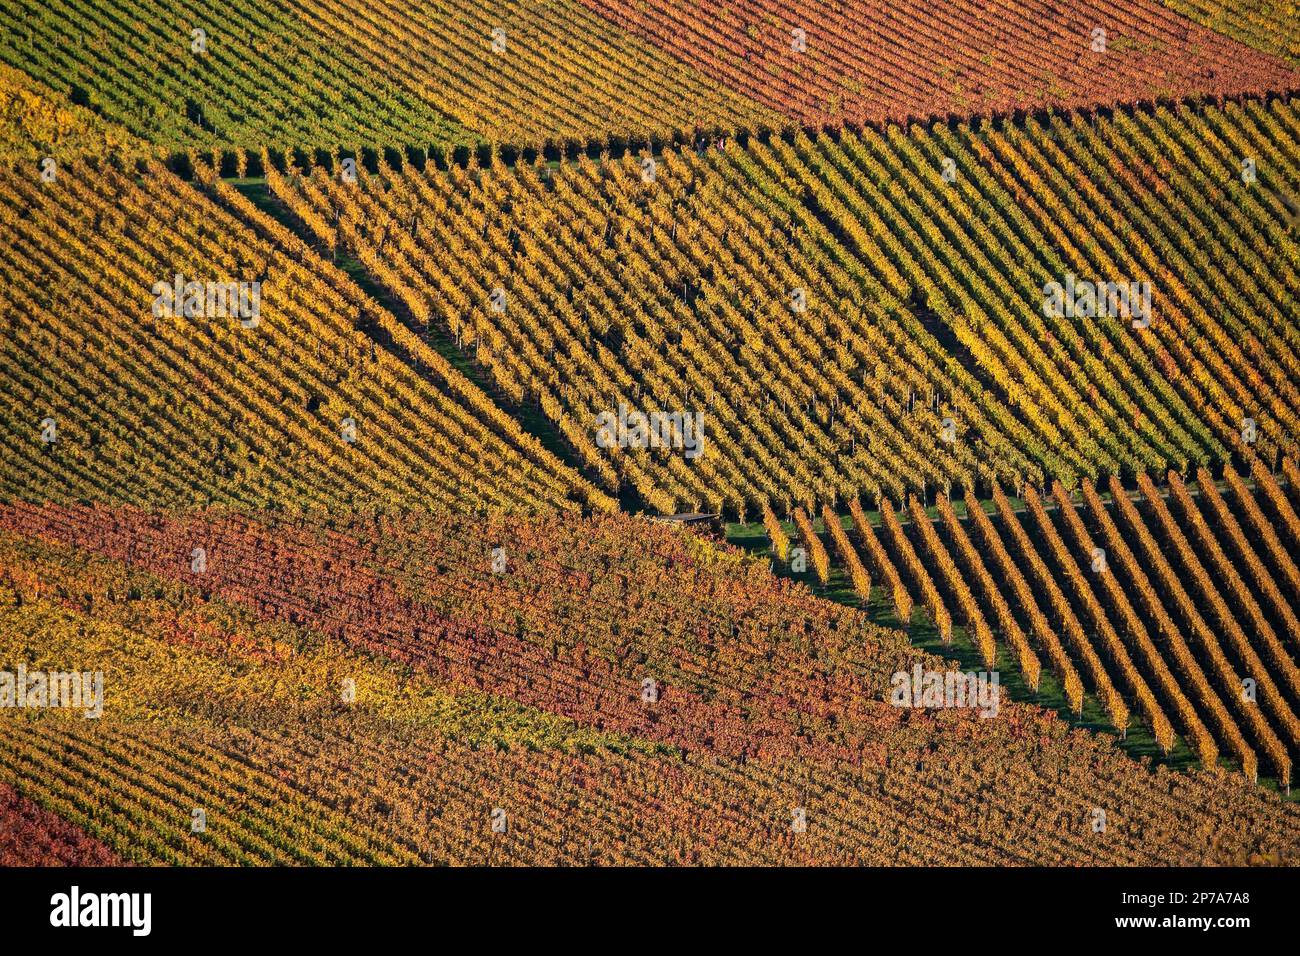 Drone image, vineyards in autumn, near Michelbach, Baden-Wuerttemberg, Germany Stock Photo